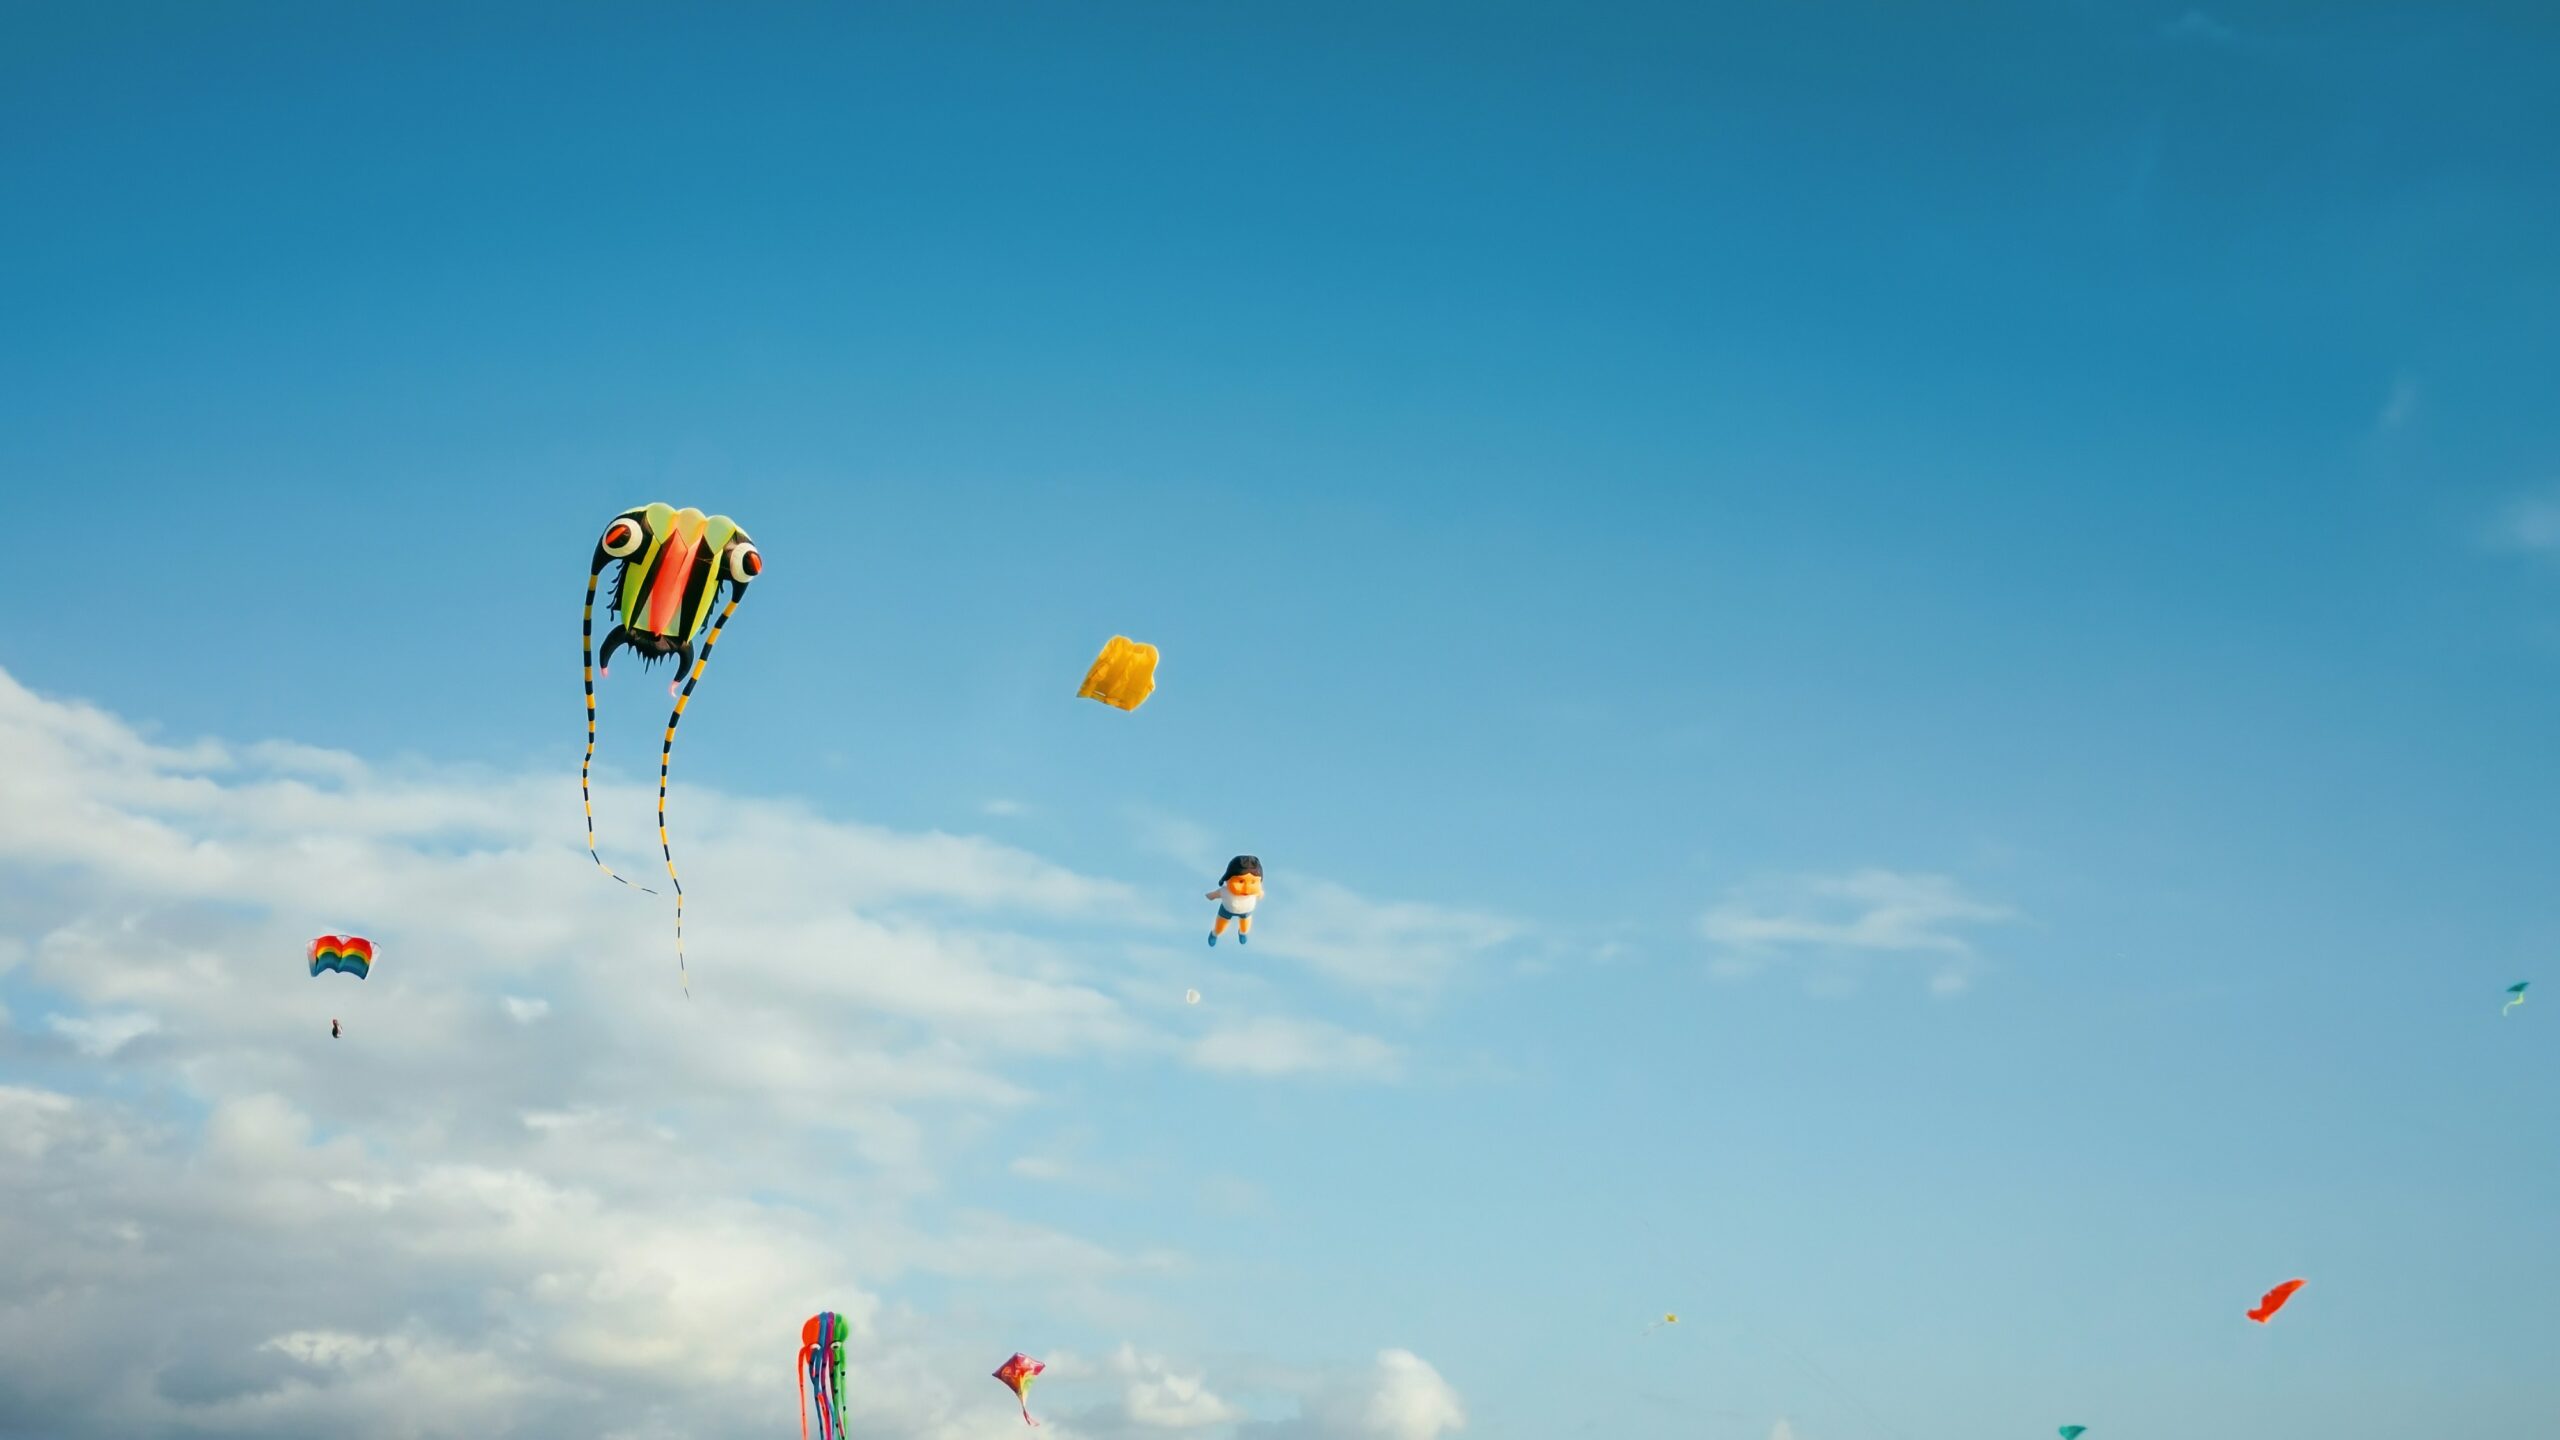 There are some festivals in Antigua during the dry season. 
Pictured: kites on bright cloudy day